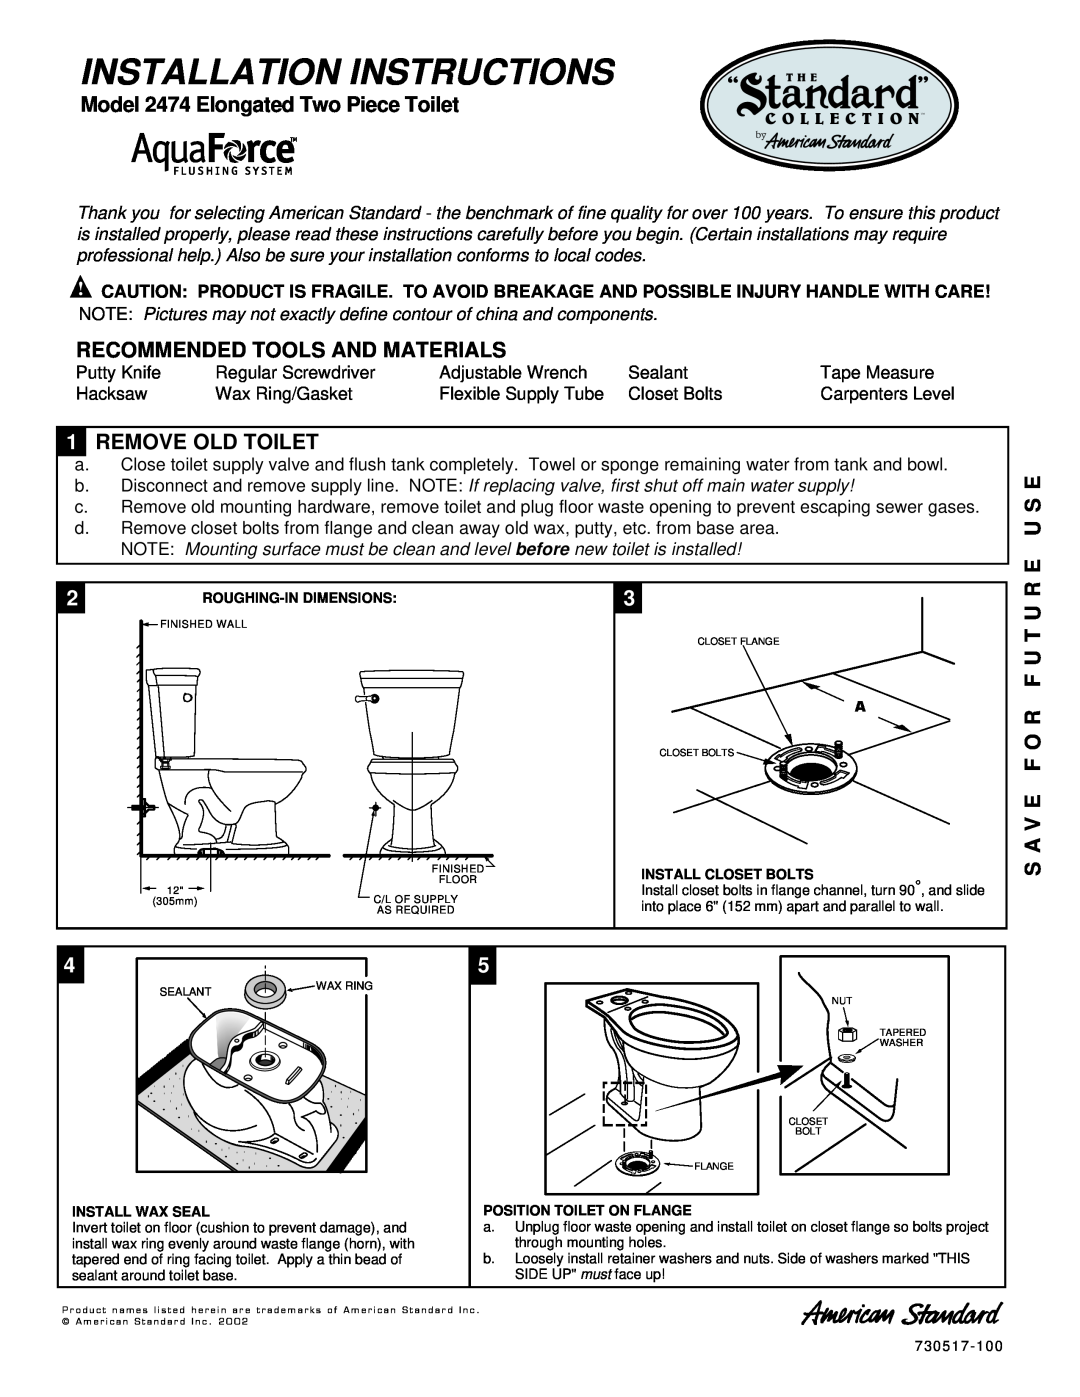 American Standard installation instructions Model 2474 Elongated Two Piece Toilet, Recommended Tools And Materials 